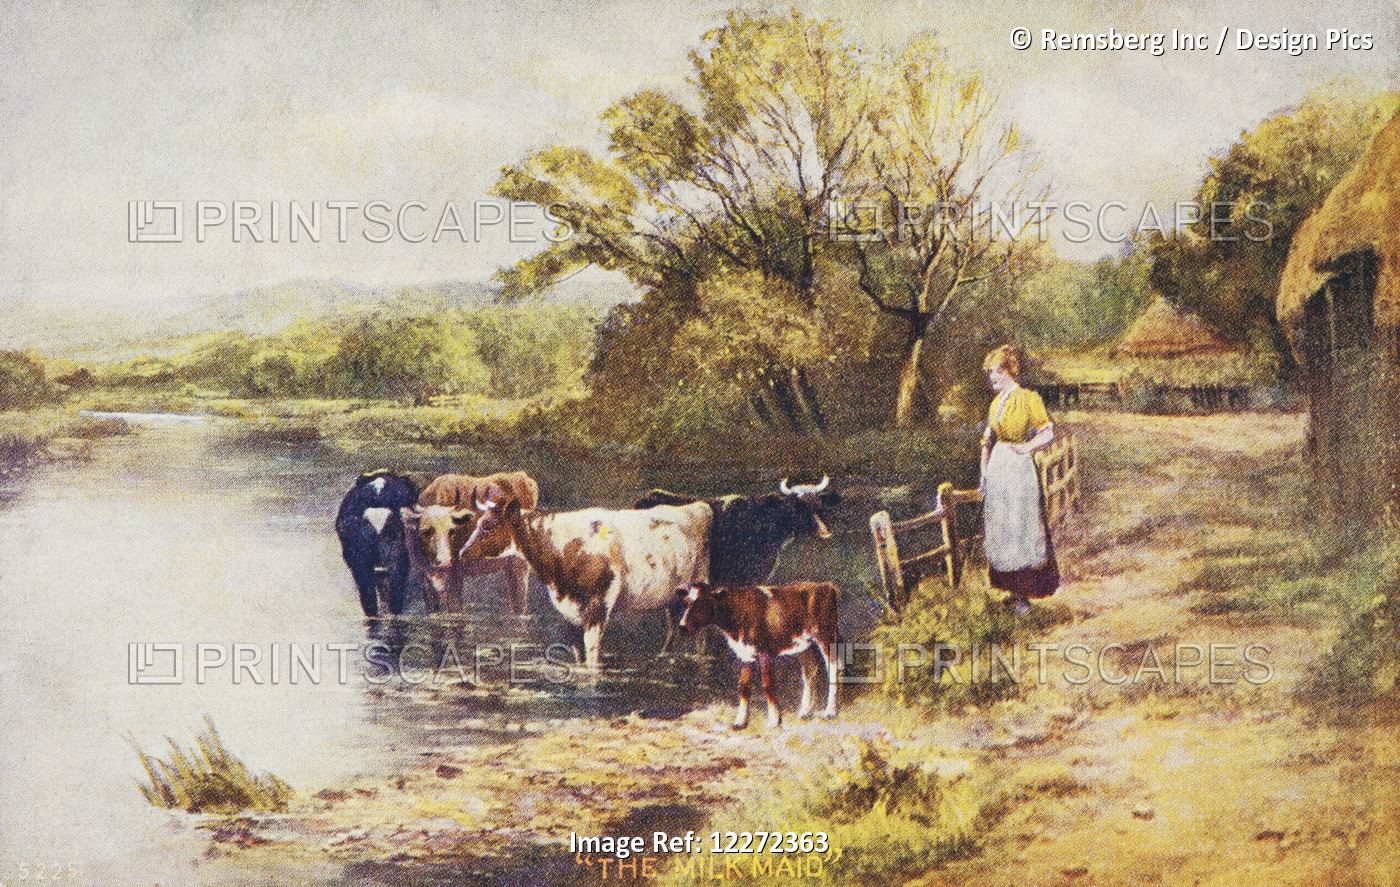 Vintage Greeting Card With Illustration Of Milkmaid Next To Cows In A Stream ...